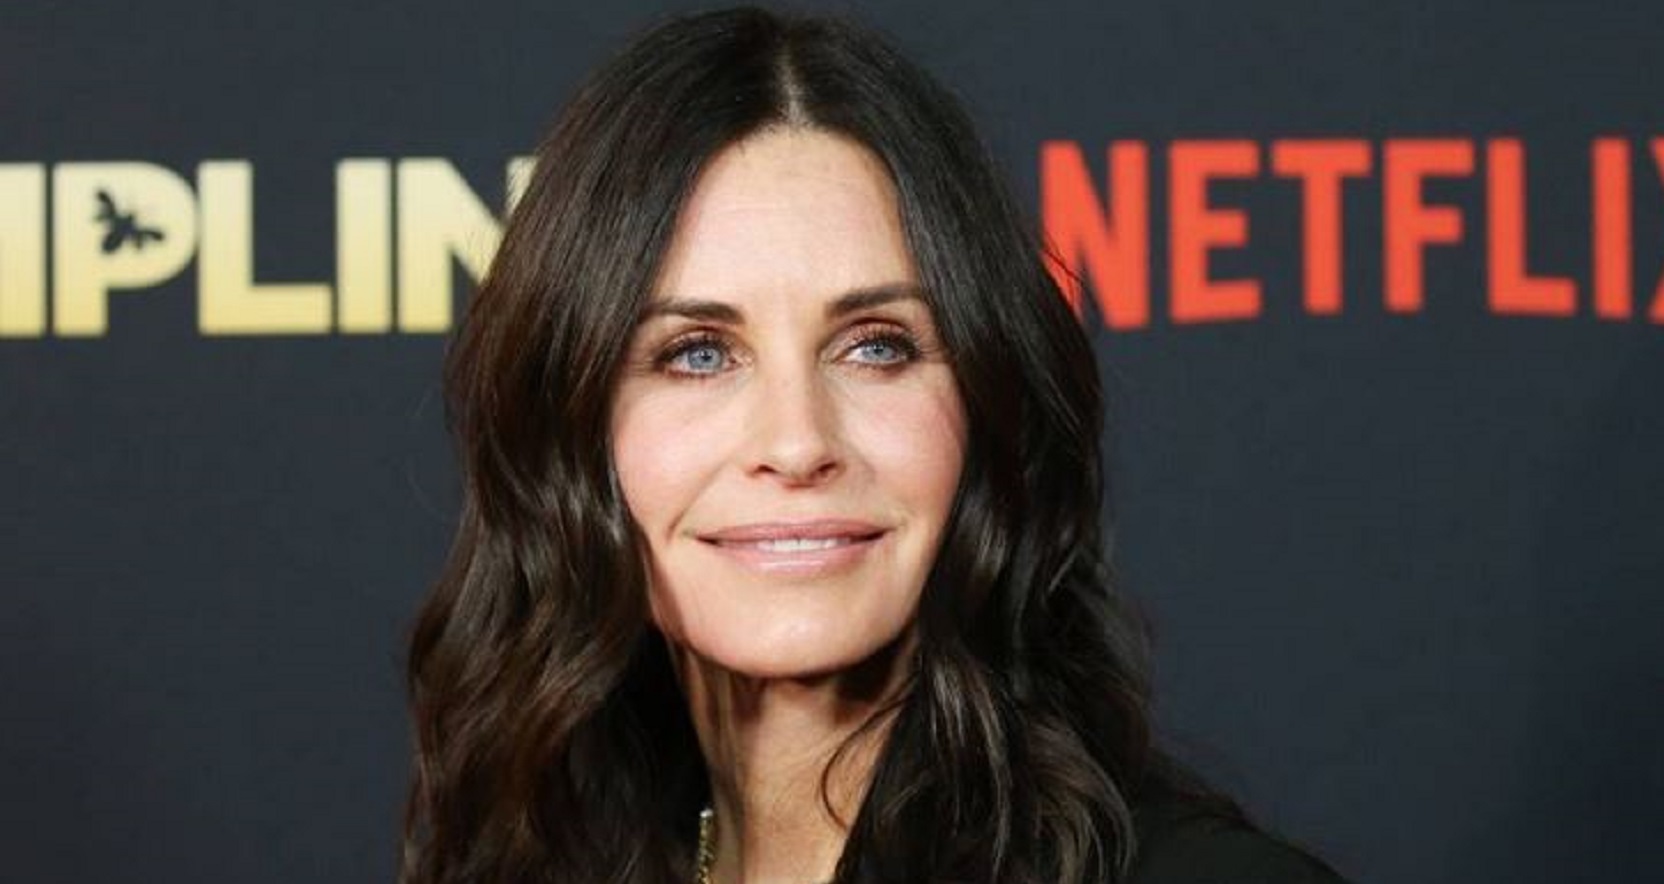 Friends Star Courteney Cox Has Been Making Money From This ‘Secret’ Venture Aside From Acting…